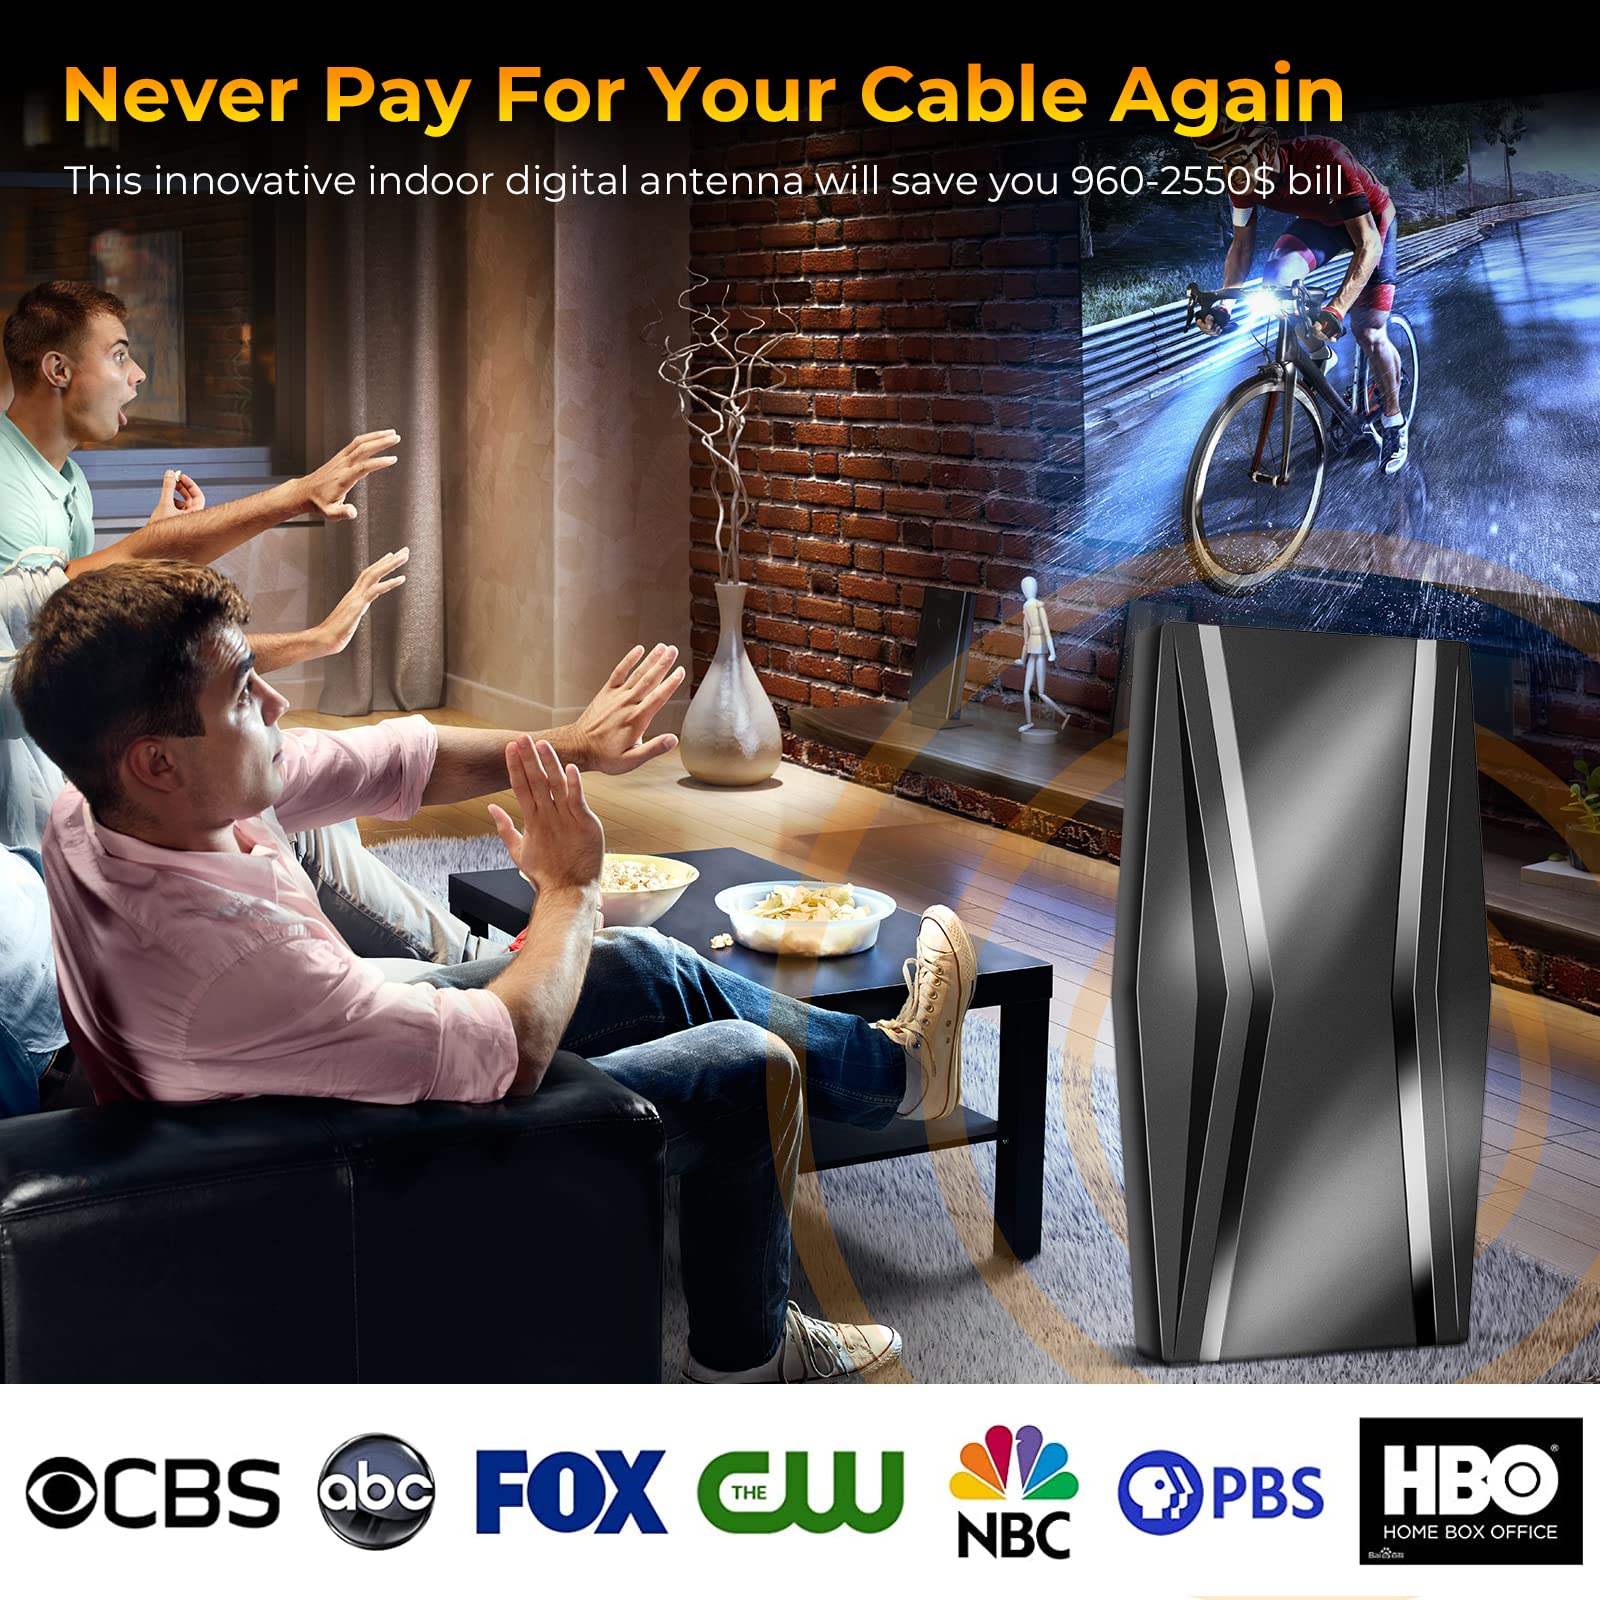 2023 Upgraded TV Antenna for Smart tv Up to 520+ Miles, Antenna TV Digital HD Indoor with Amplifier and Signal Booster- Support 4K 1080p Fire tv Stick and All Older TV's -38ft Coax HDTV Cable